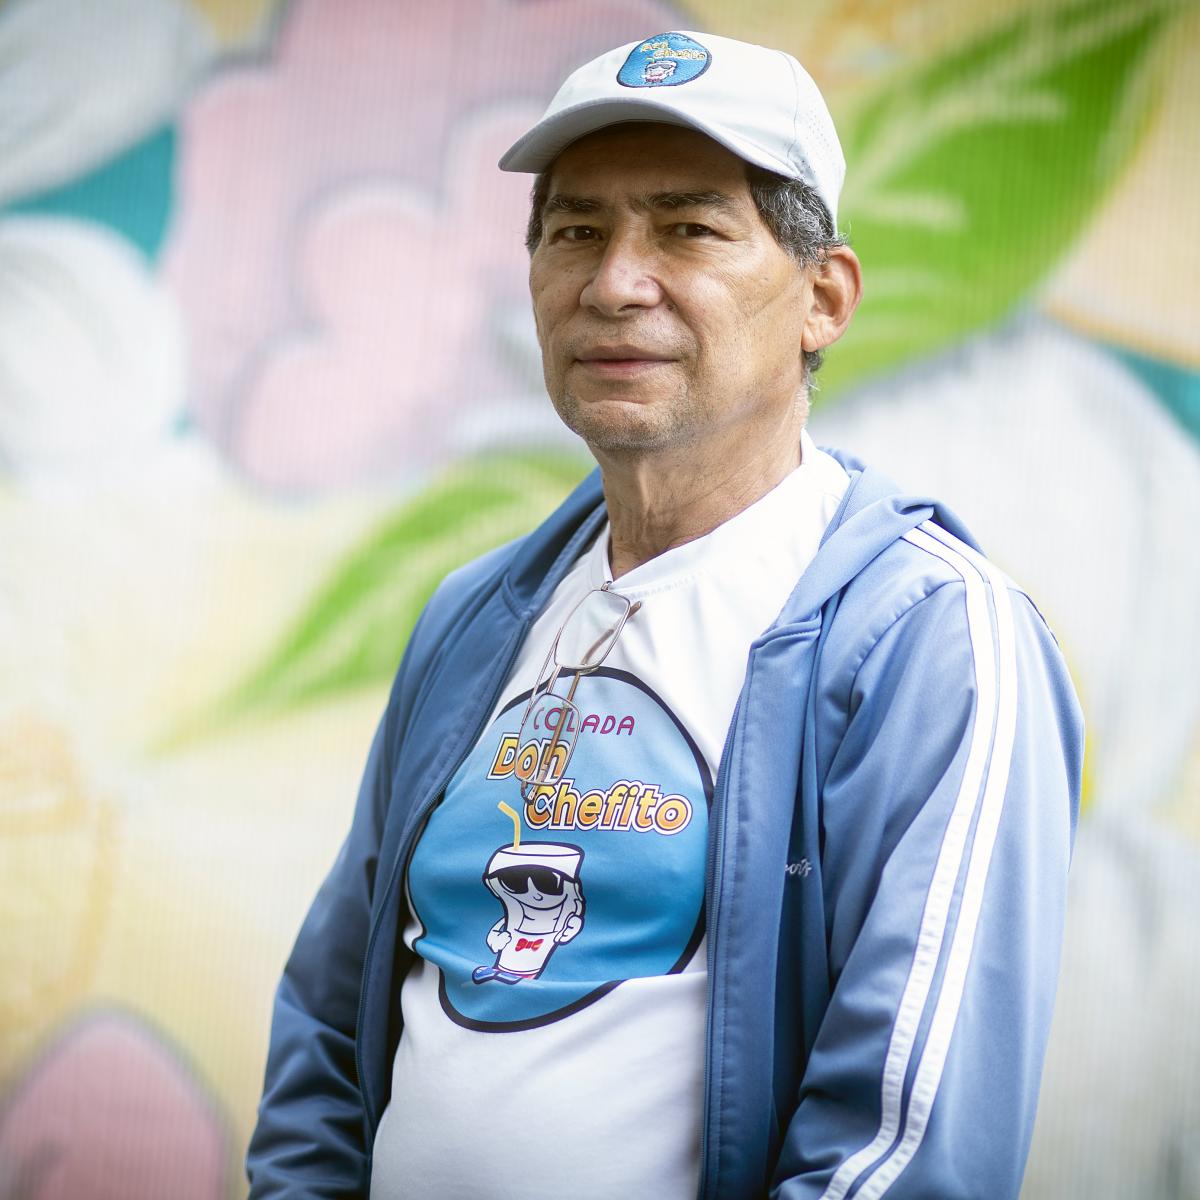 This picture shows Carlos Torres’ upper body and face. He is wearing a blue sports jacket and a hat, and is standing in front of a colorful mural with flowers.